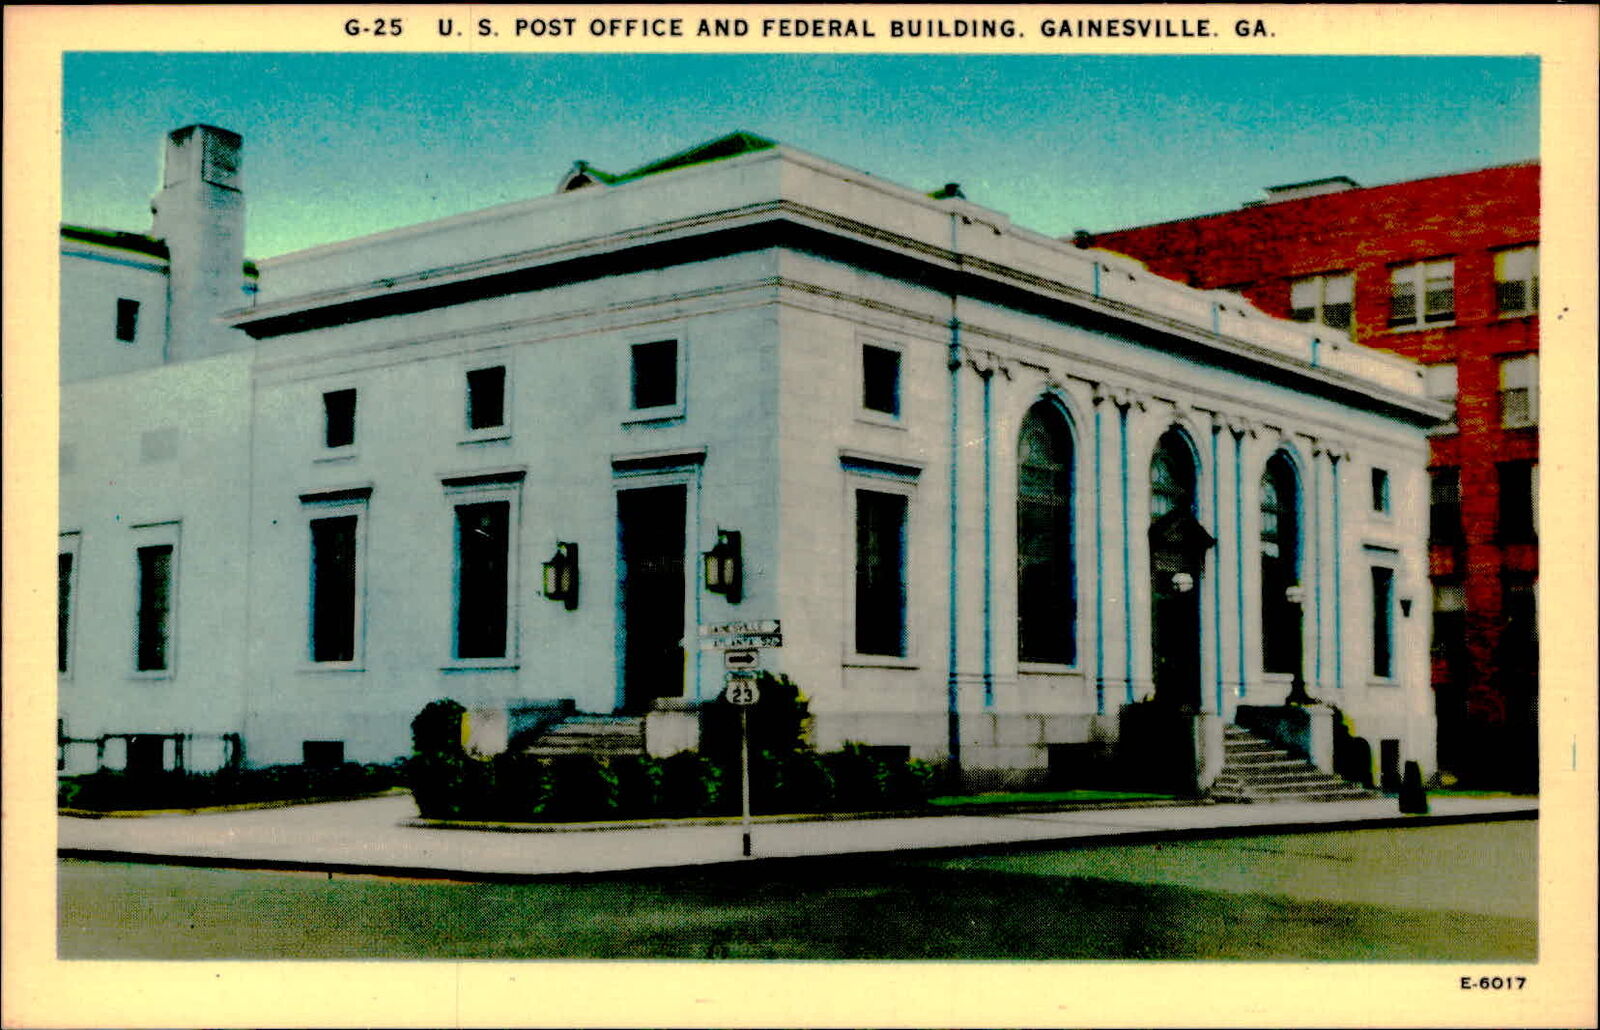 Postcard: G-25 U. S. POST OFFICE AND FEDERAL BUILDING. GAINESVILLE. GA